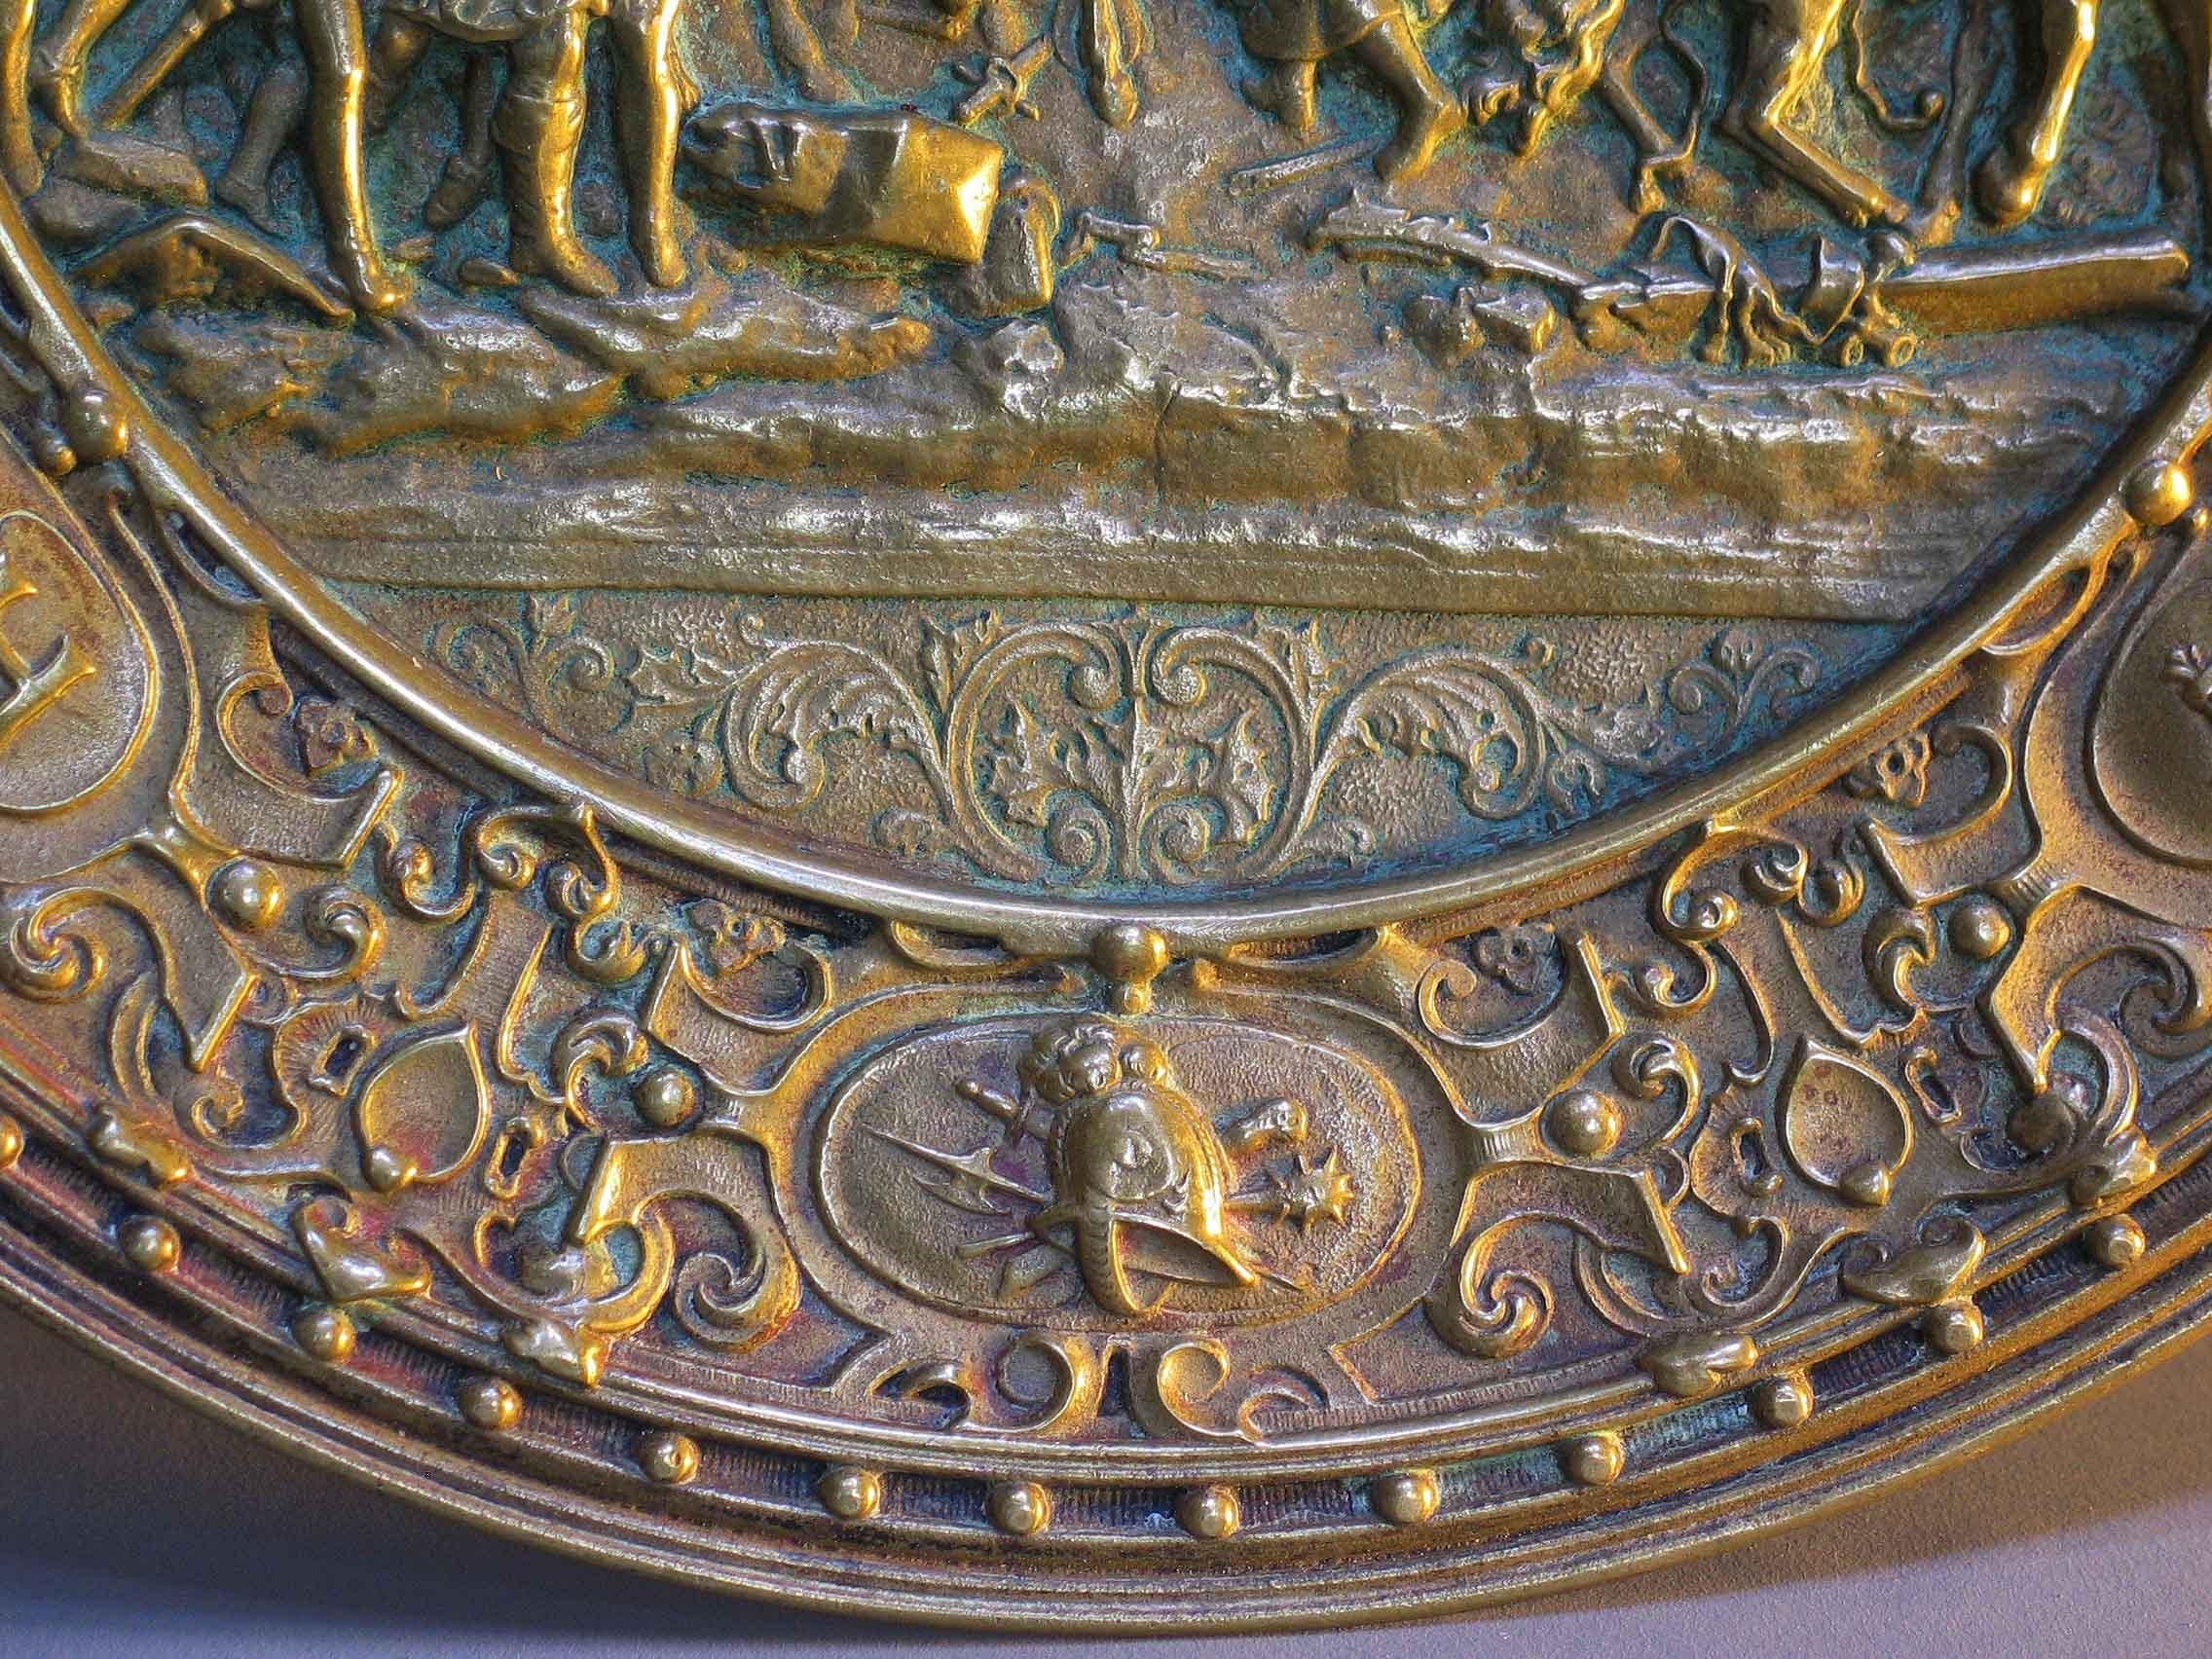 19th Century German Bronze Historicism Charger Depicting Entry of Henry IV into Paris in 1594 For Sale